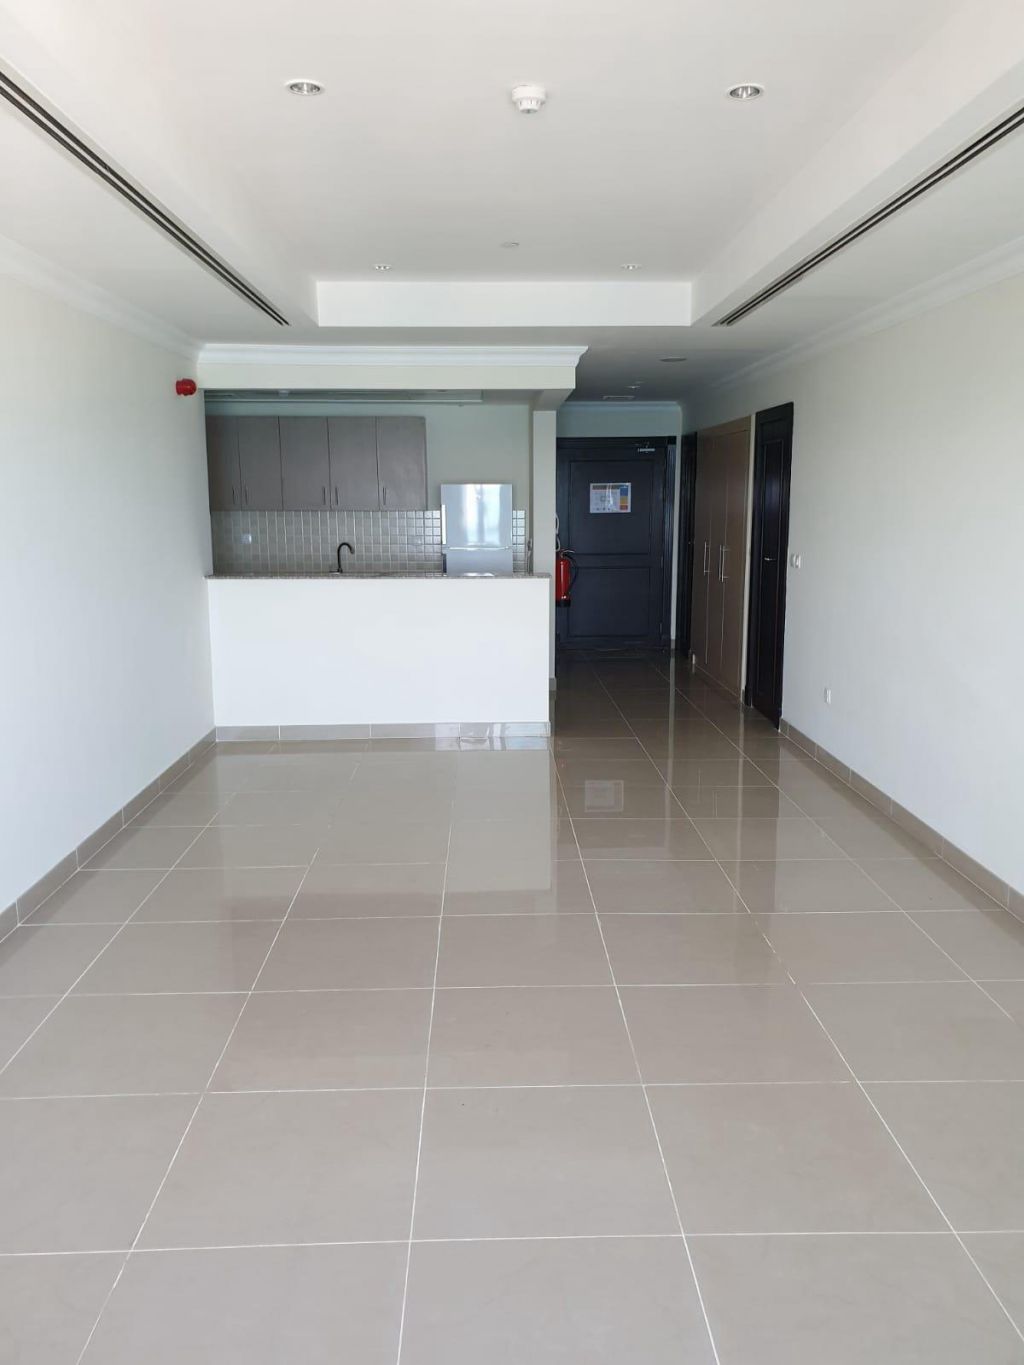 Residential Property Studio S/F Apartment  for rent in The-Pearl-Qatar , Doha-Qatar #16461 - 1  image 